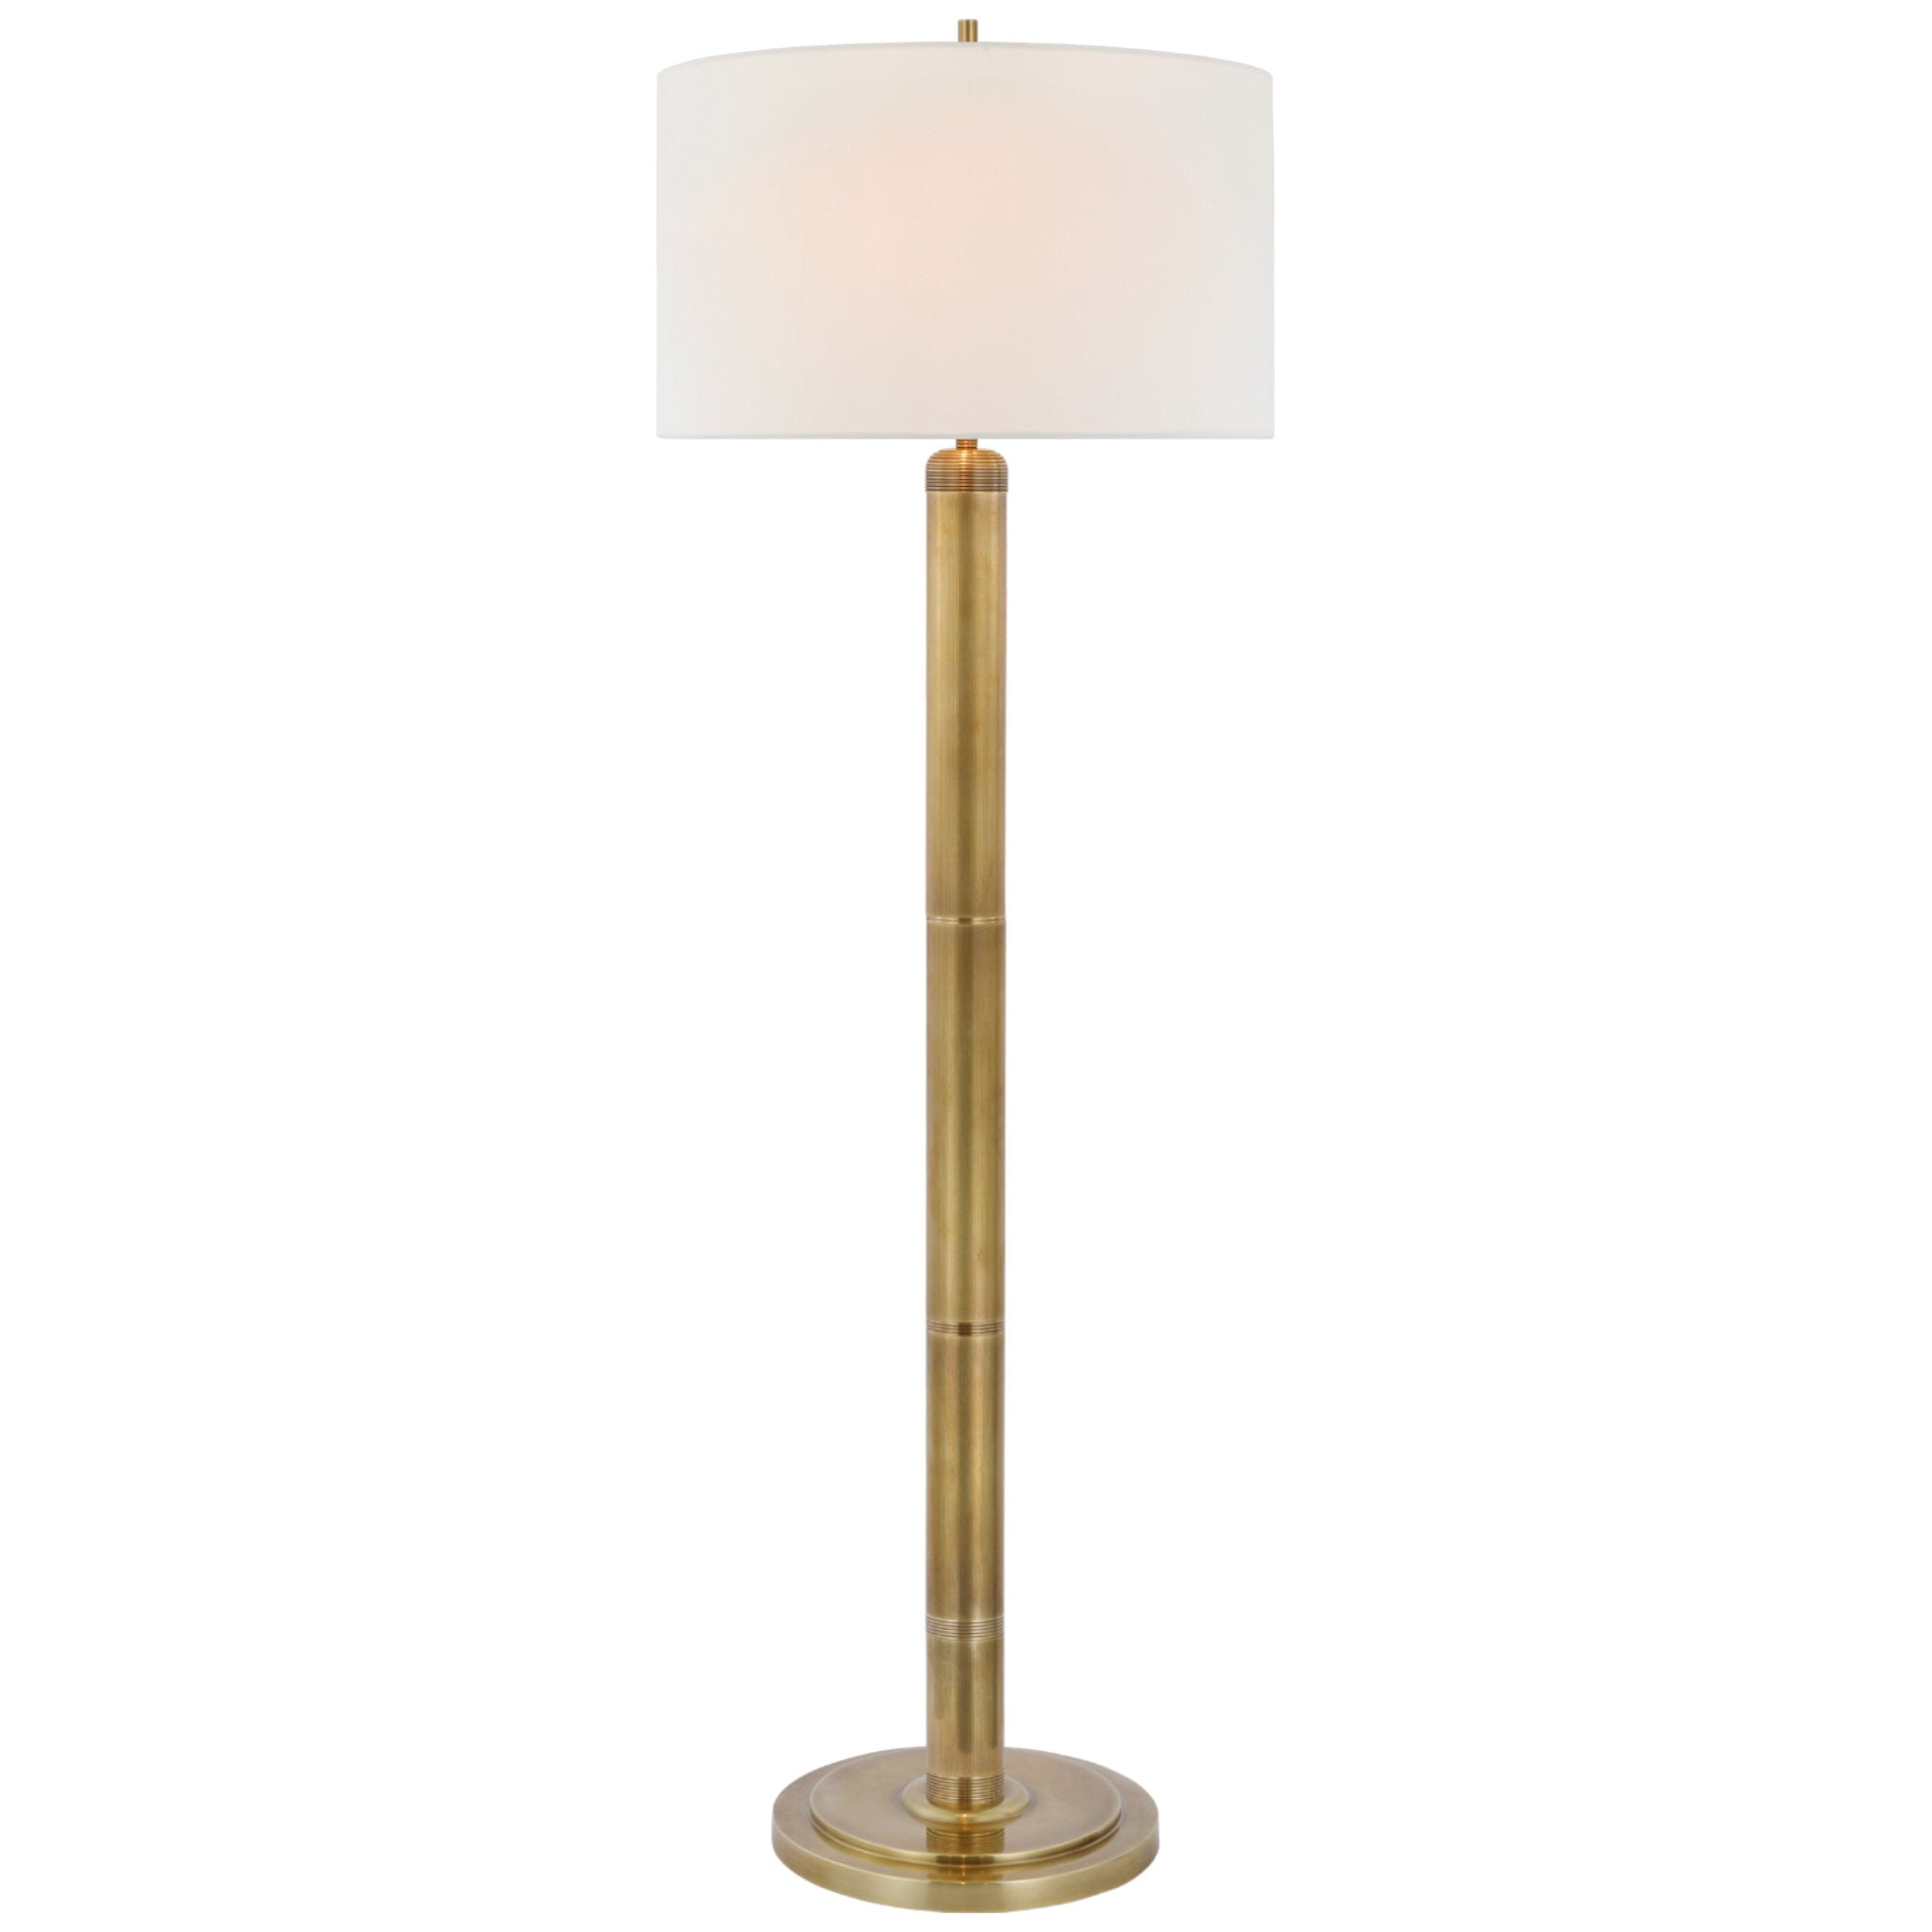 Thomas O'Brien Longacre Floor Lamp in Hand-Rubbed Antique Brass with Linen Shade